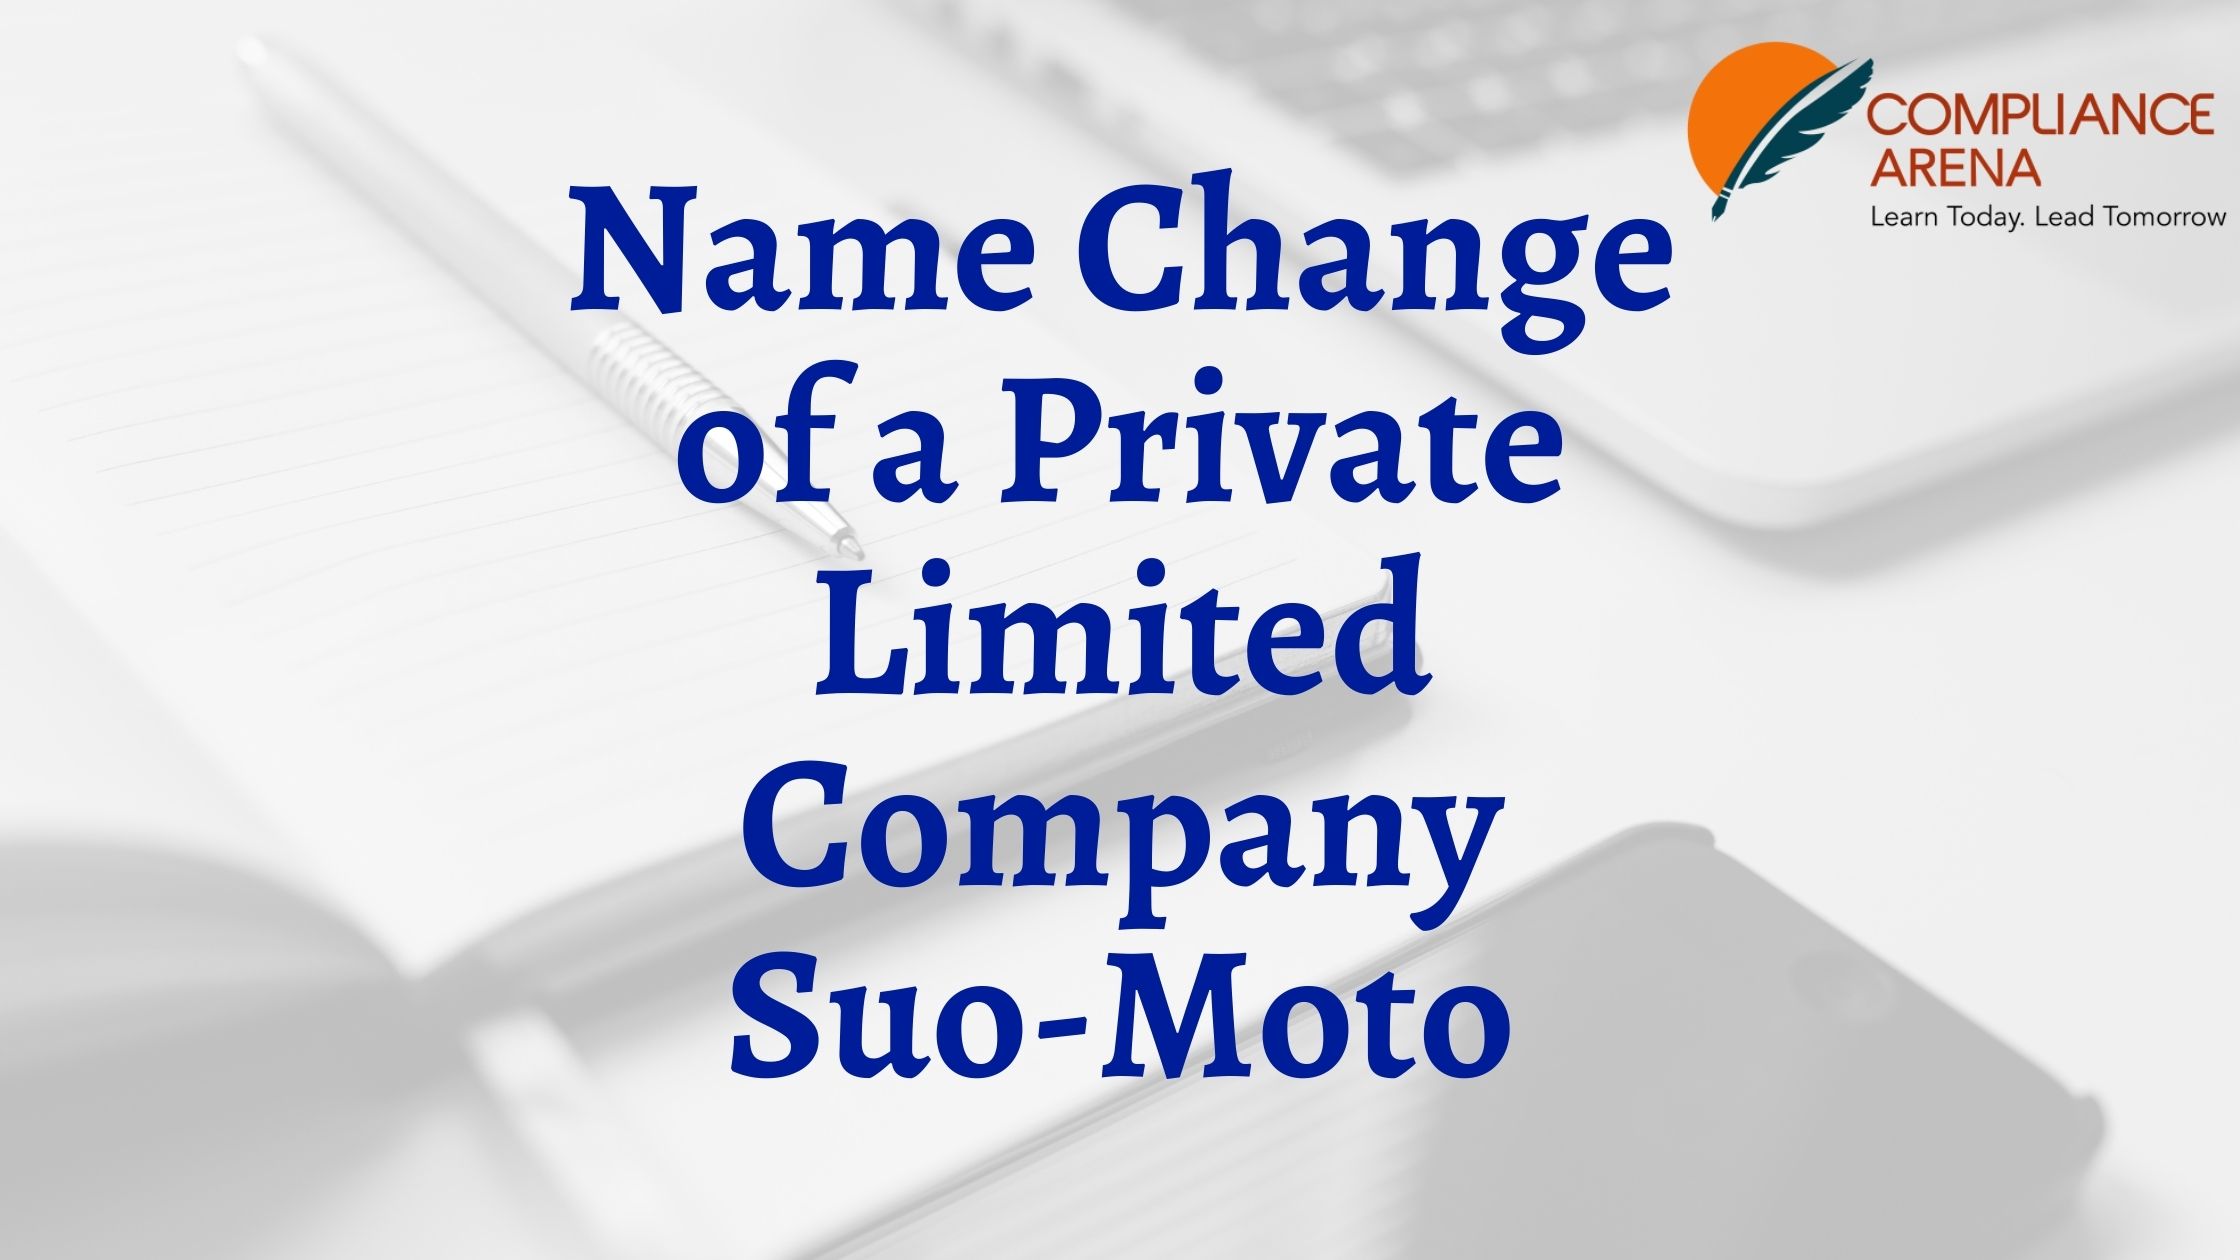 All About Name Change of a Private Limited Company